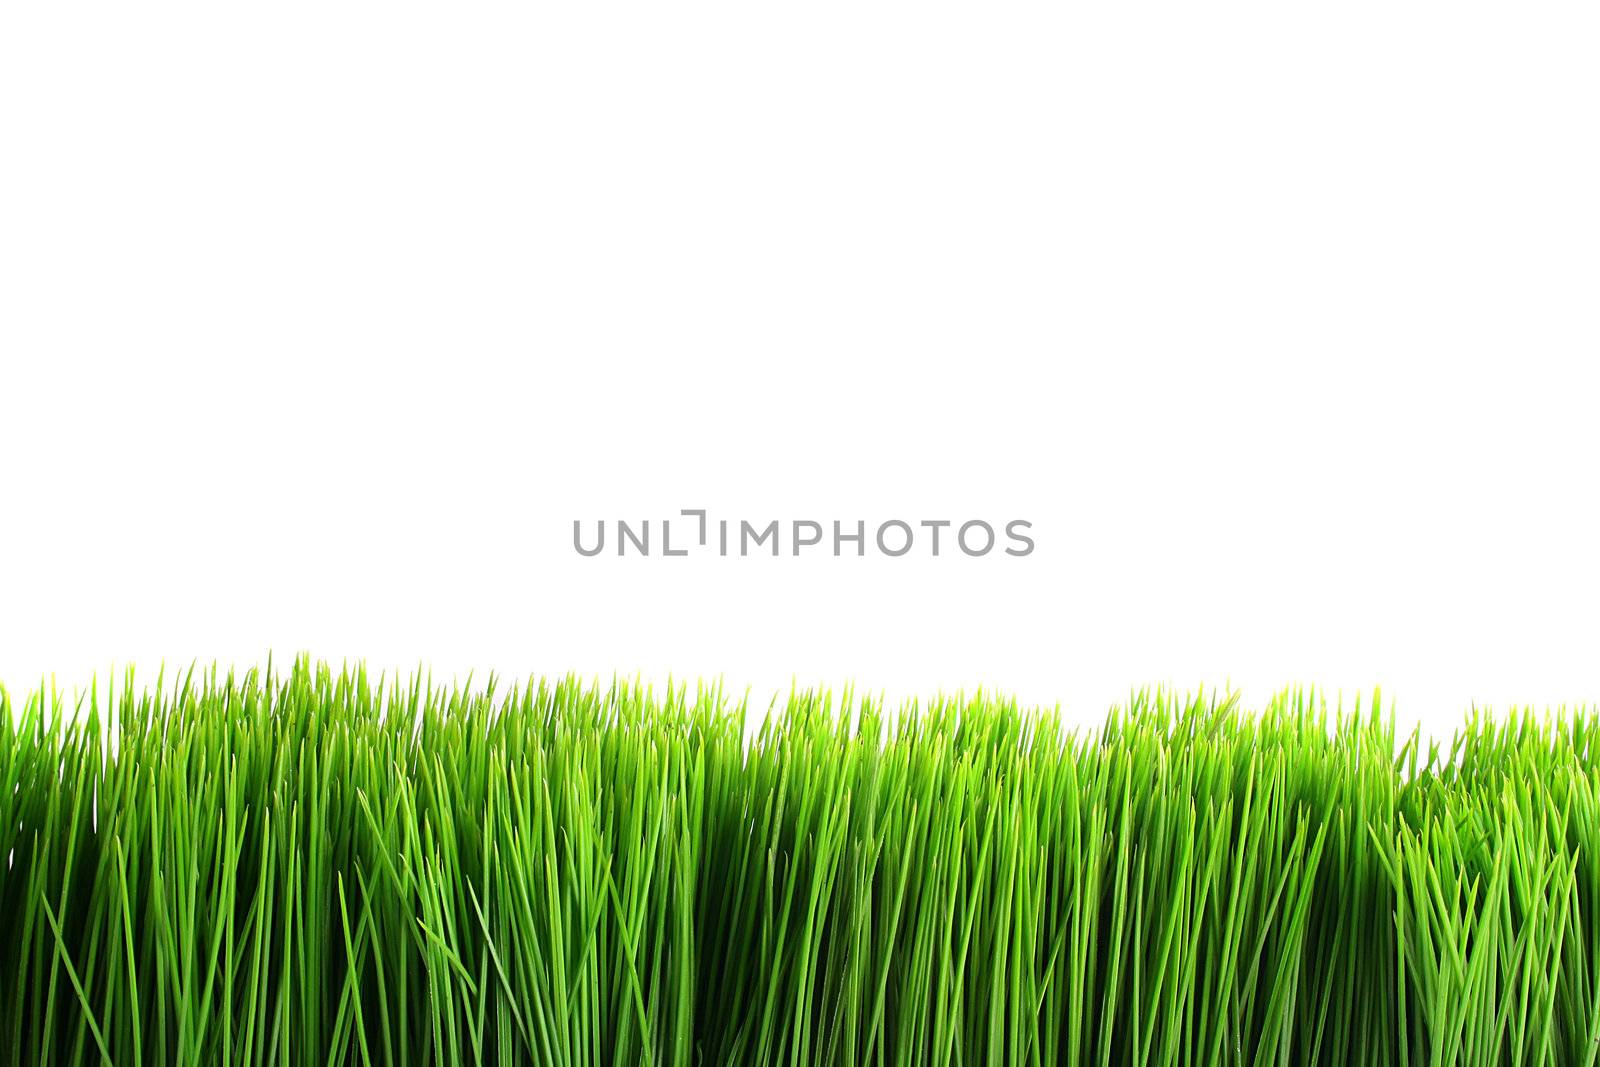 Green grass on a white background. Use, as a design element is possible.